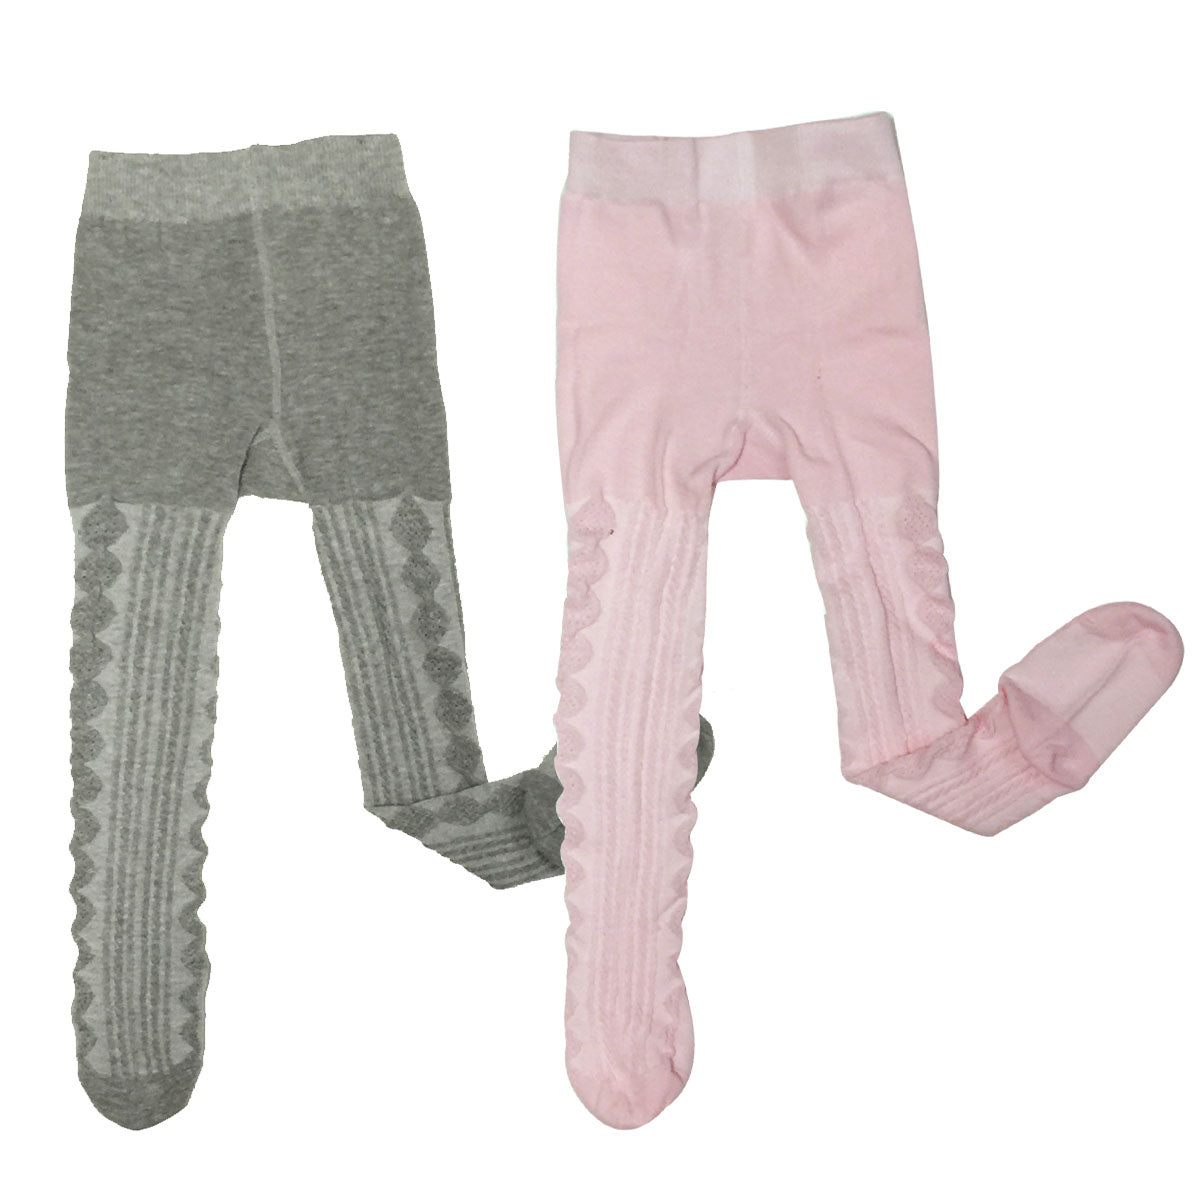  Cable Knit Girls Tights 6-7 Cotton Tights For Girls